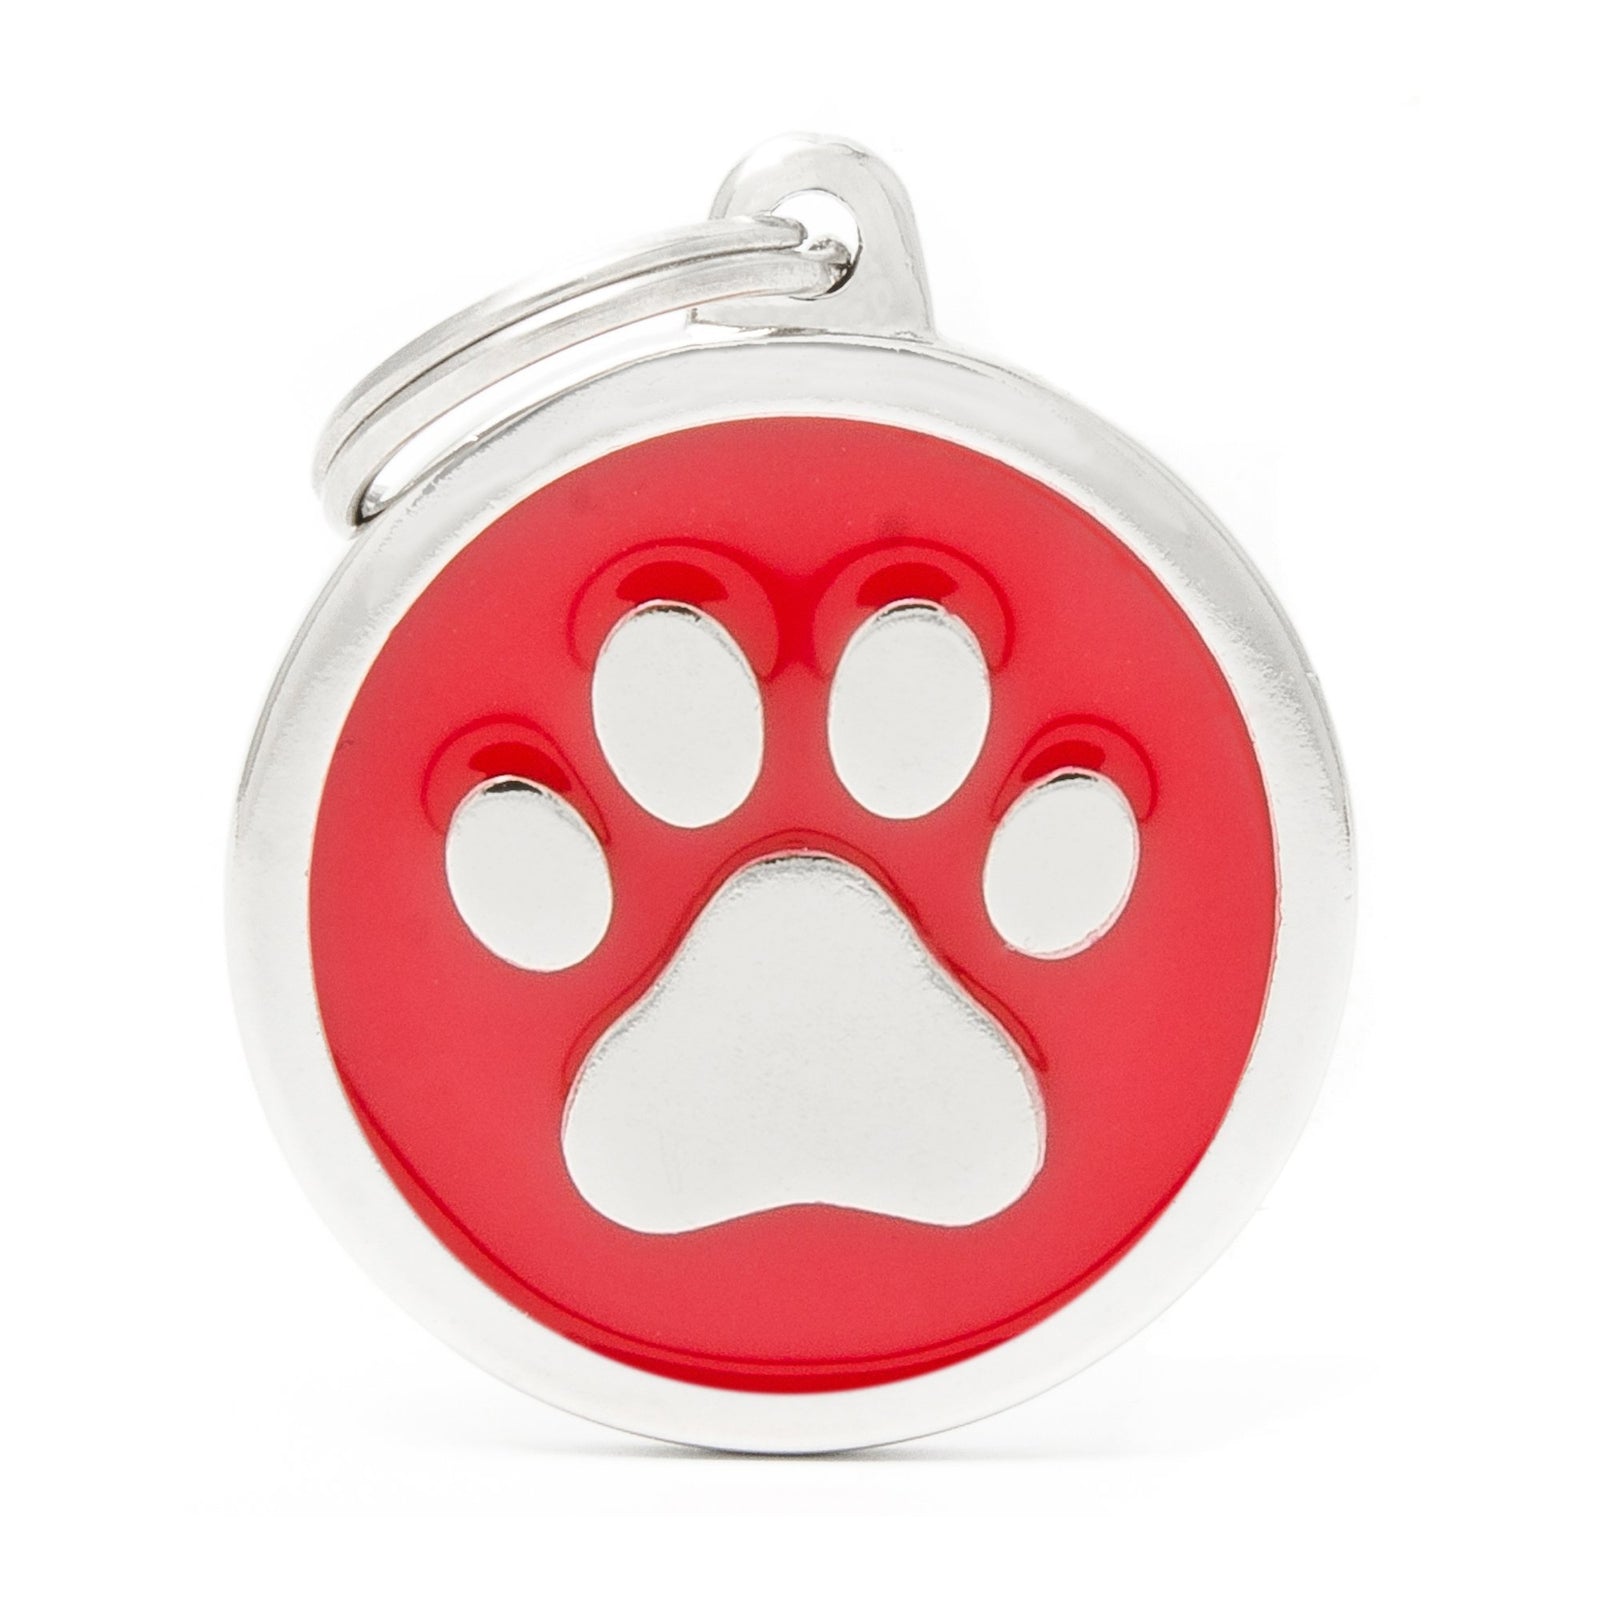 My Family Classic Red Paw Pet I.D. Tag